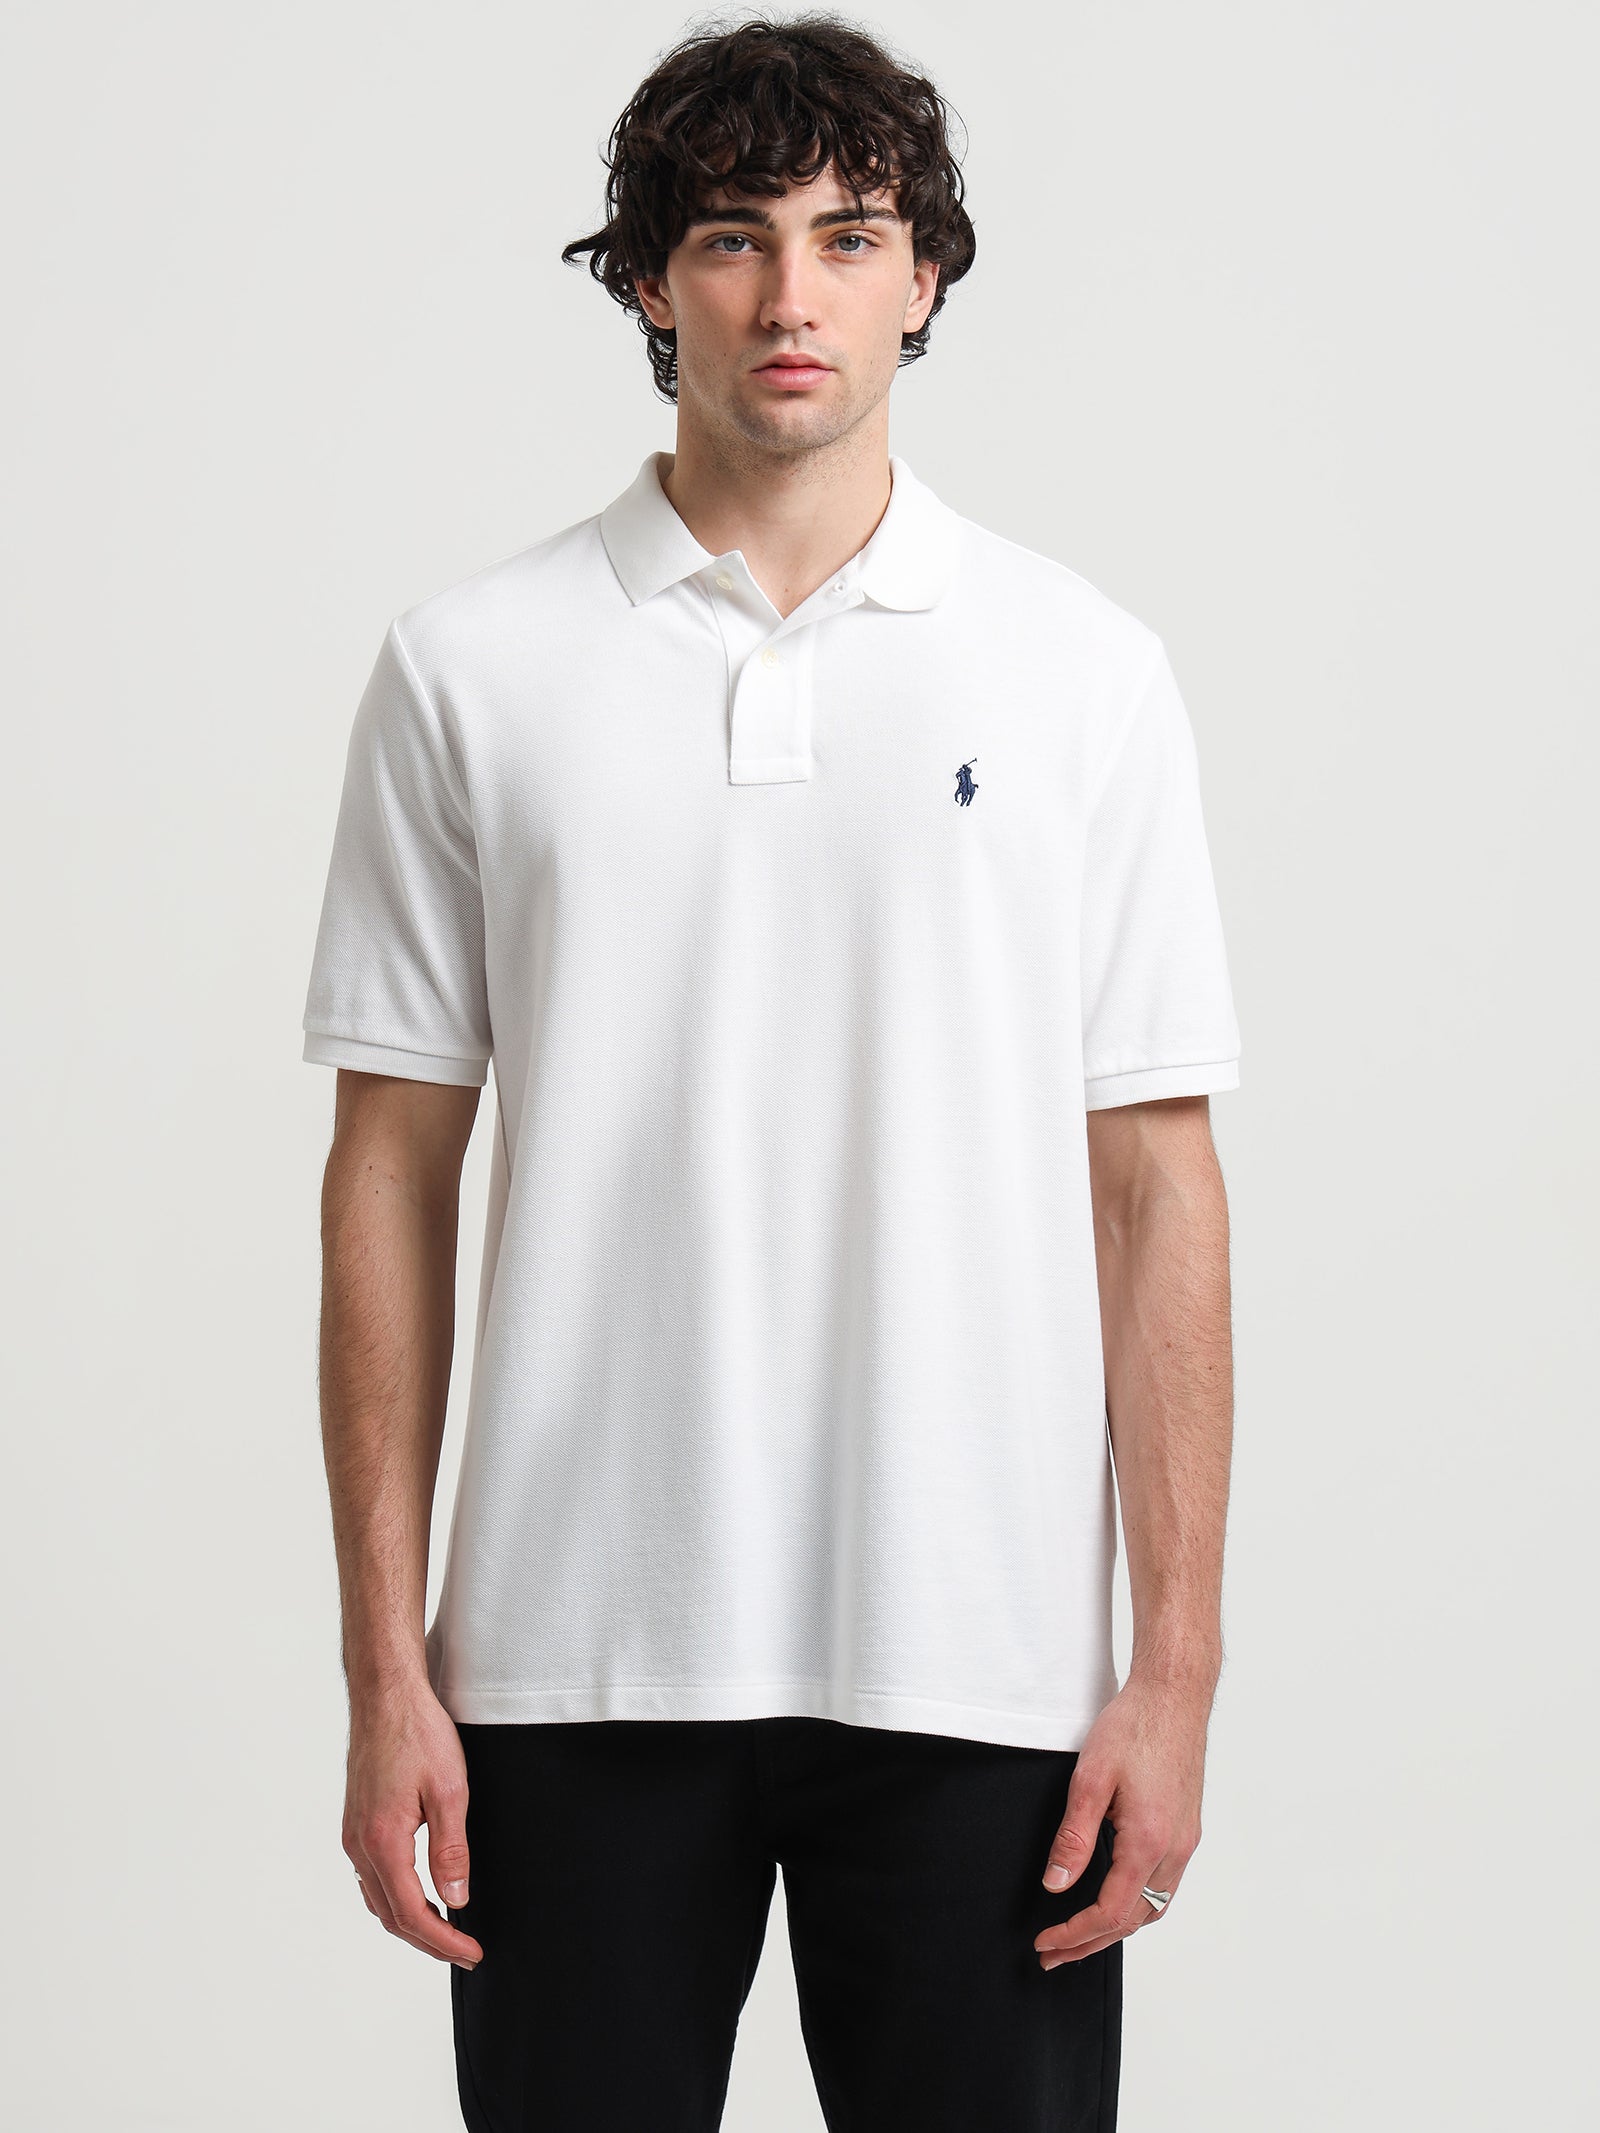 Classic Fit Mesh Polo in White - Glue Store